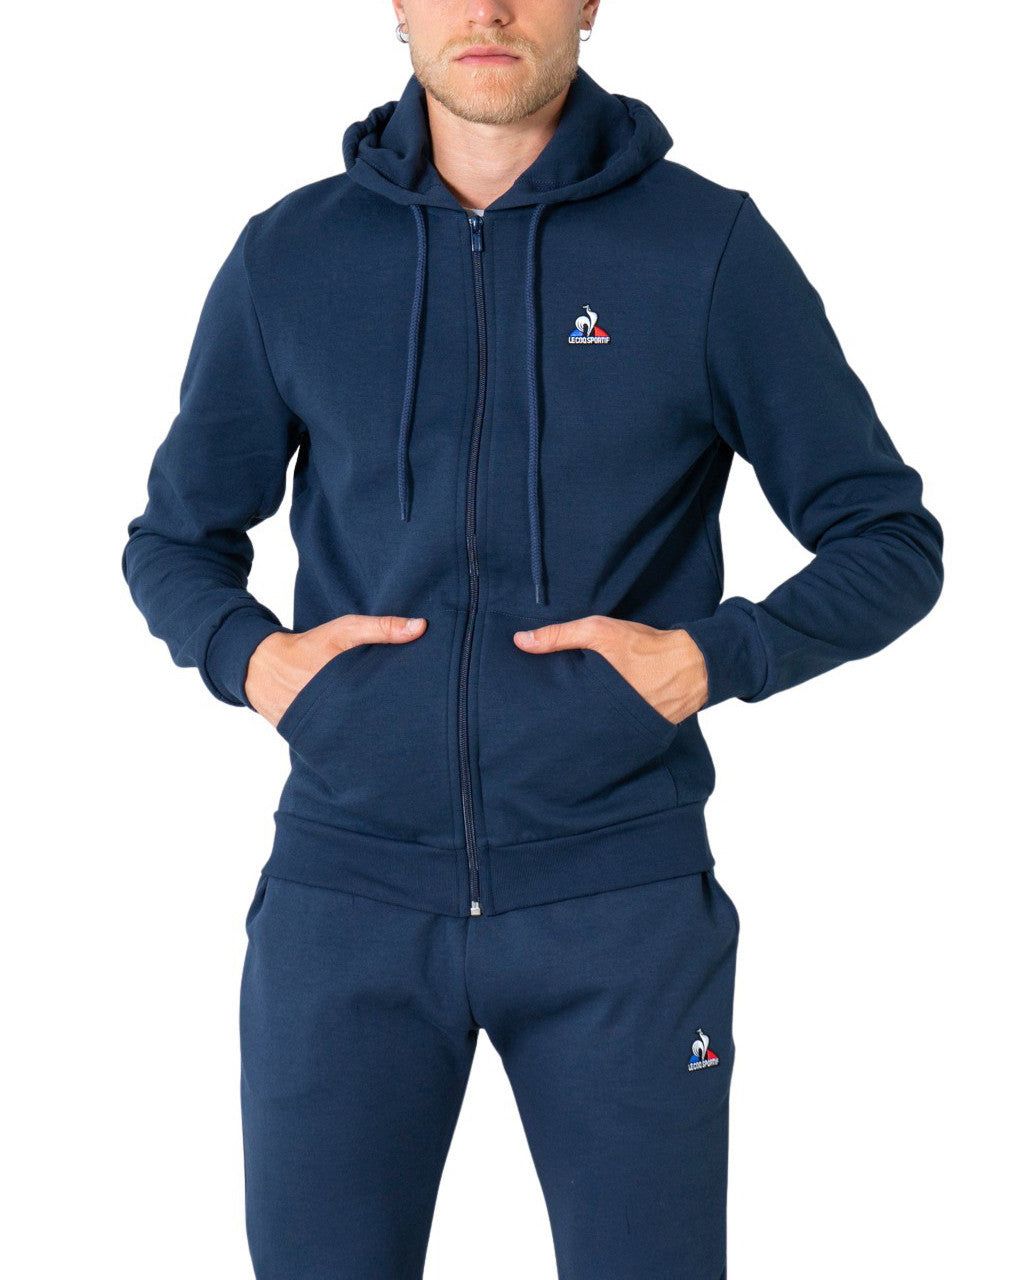 Brand: Le Coq Sportif
Gender: Men
Type: Sweatshirts
Season: Fall/Winter

PRODUCT DETAIL
• Color: blue
• Fastening: with zip
• Sleeves: long
• Collar: hood
• Pockets: front pockets

COMPOSITION AND MATERIAL
• Composition: -85% cotton -15% polyester 
•  Washing: machine wash at 30°